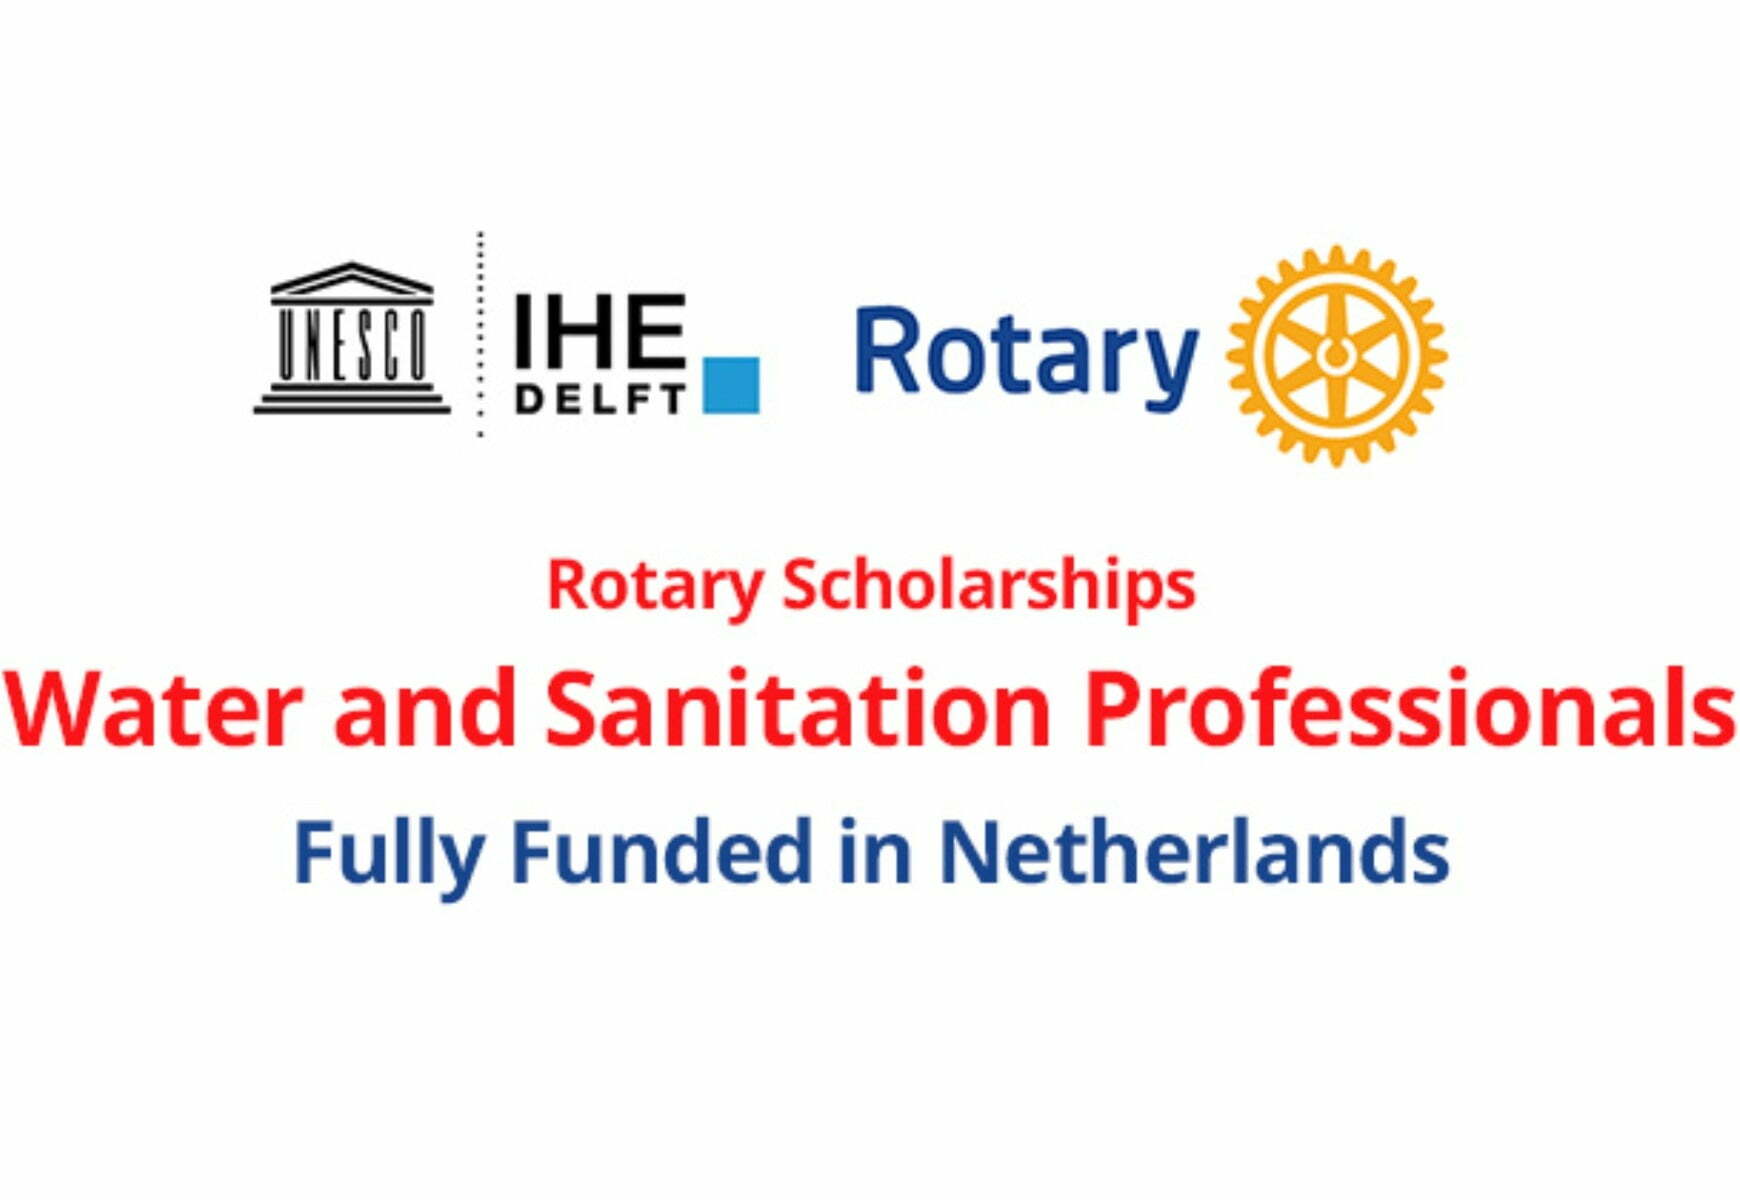 IHE Delft 2023 Rotary Scholarships for Water and Sanitation Professionals in Netherlands